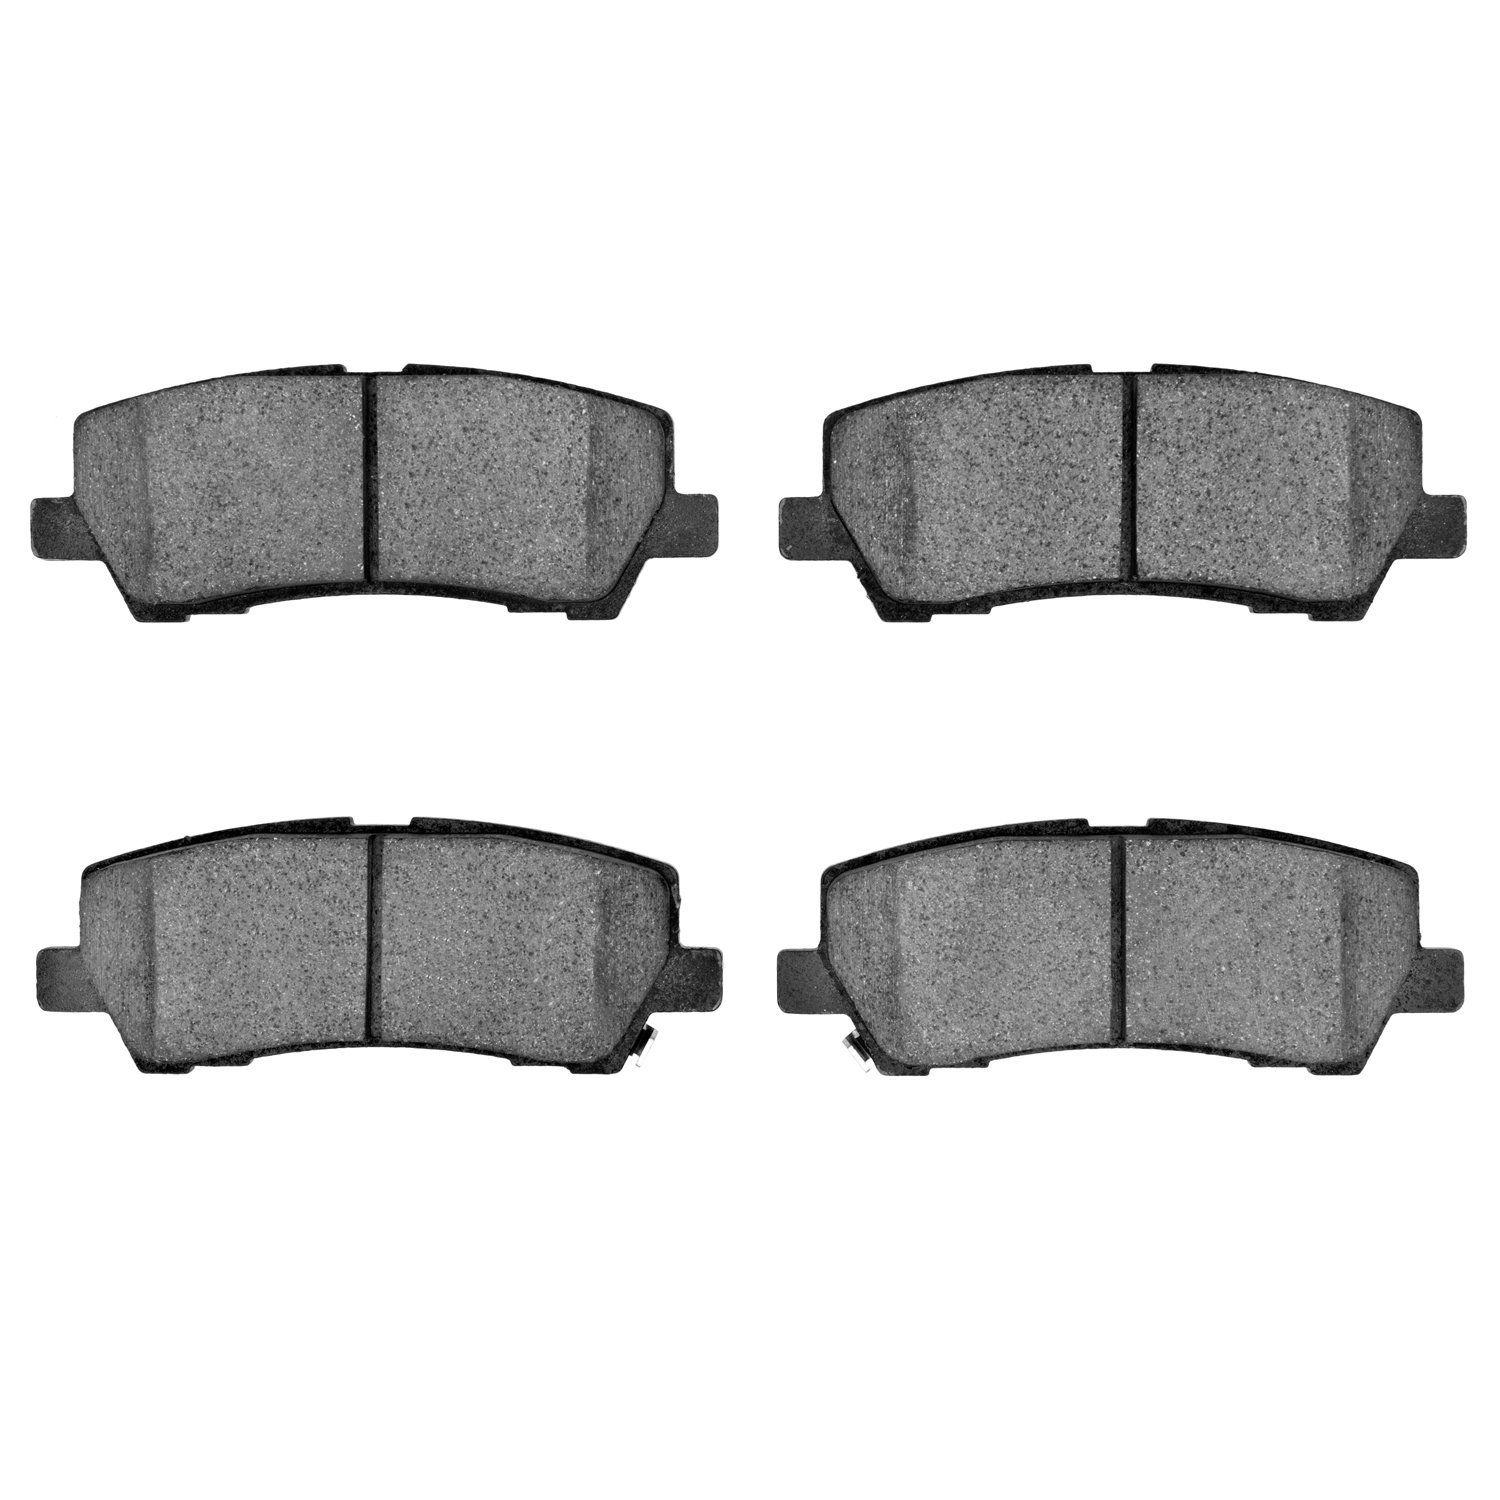 Optimum OE Brake Pads, Fits Select Ford/Lincoln/Mercury/Mazda, Position: Rear